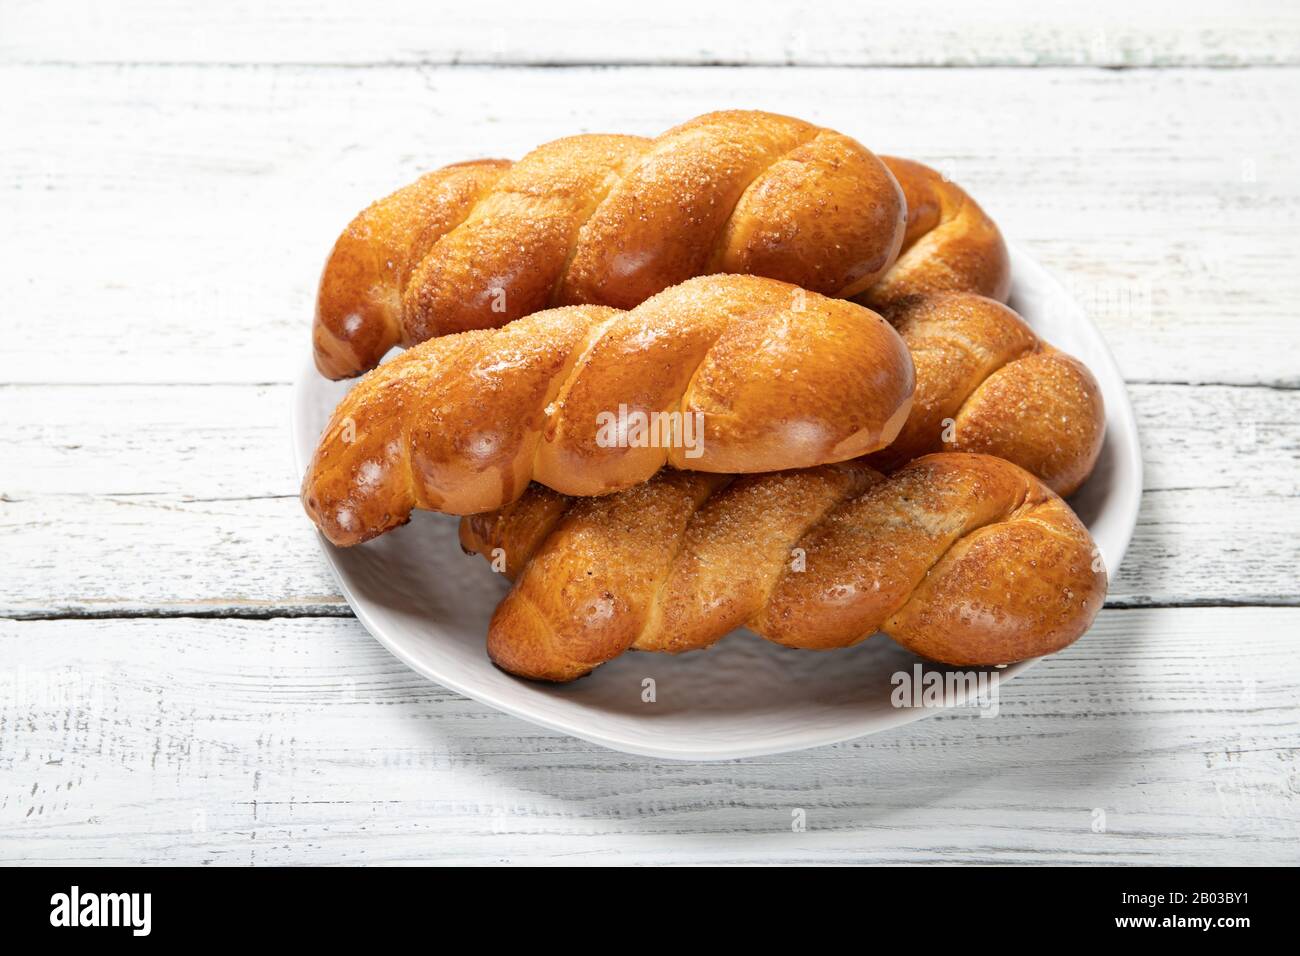 Delicious pastries.Tasty buns.Delicious Pigtail Buns Stock Photo